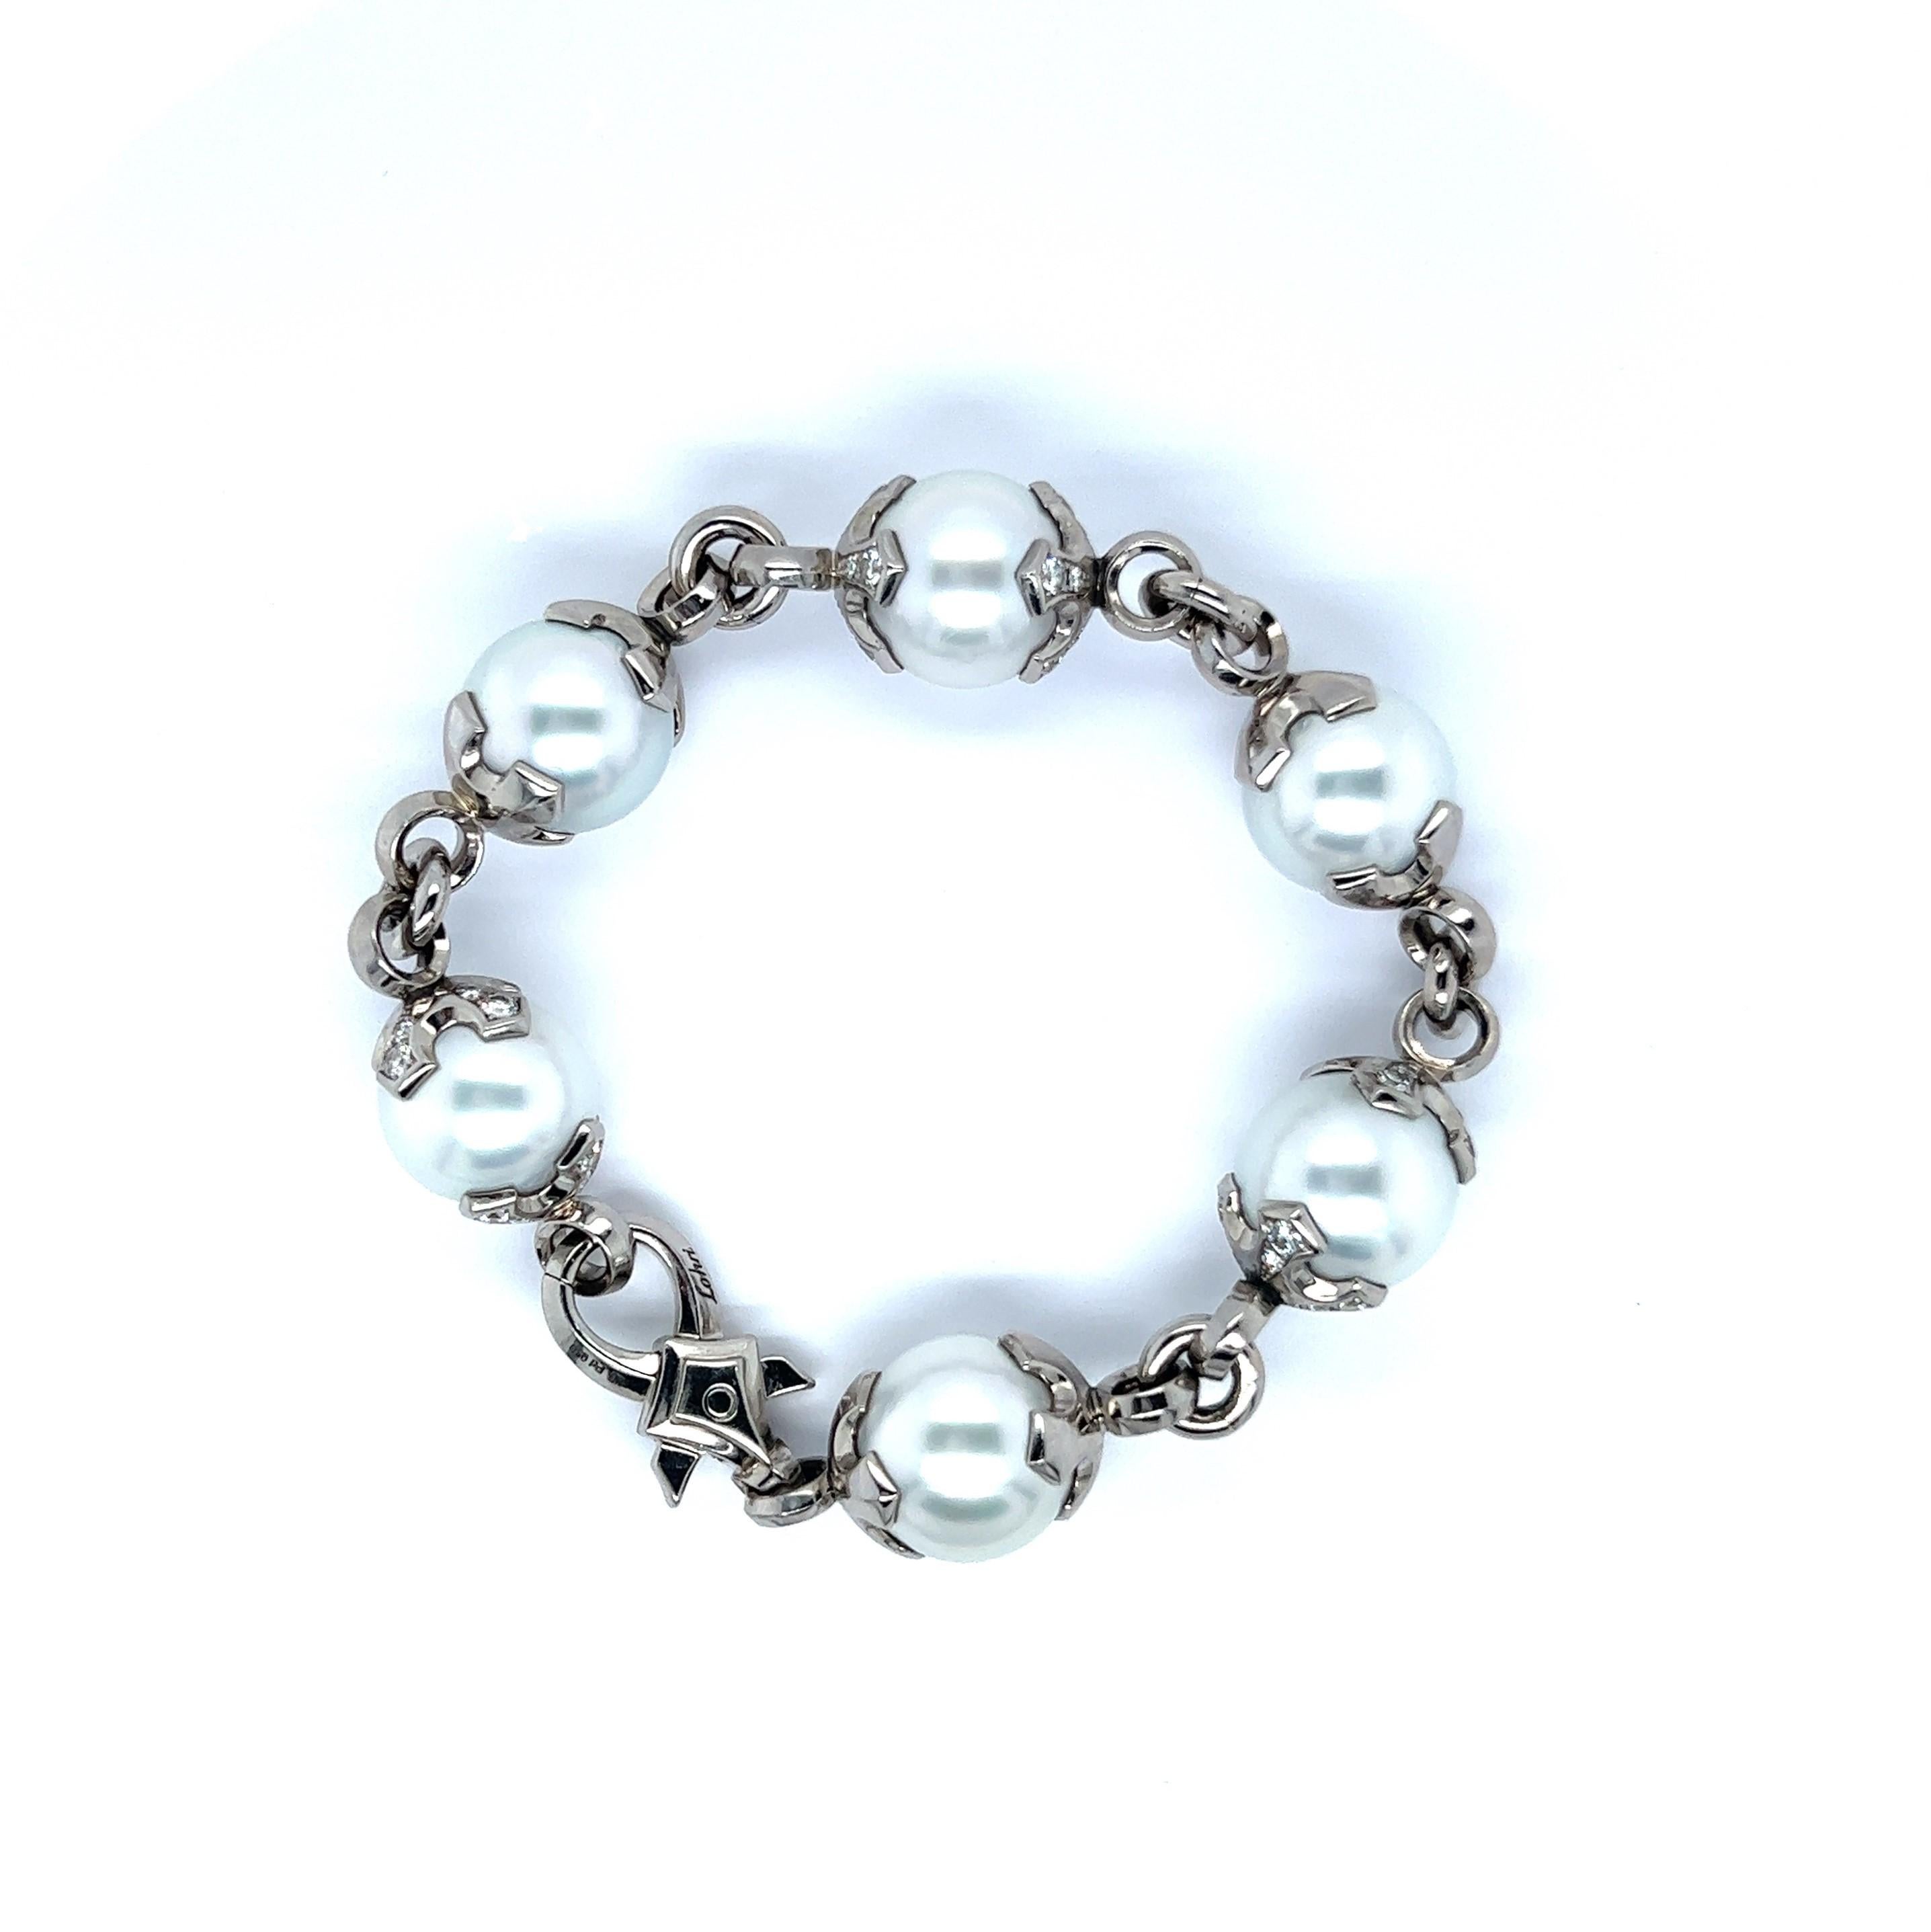 Bracelet with South Sea Cultural Pearls in Palladium 950 In Excellent Condition For Sale In Lucerne, CH